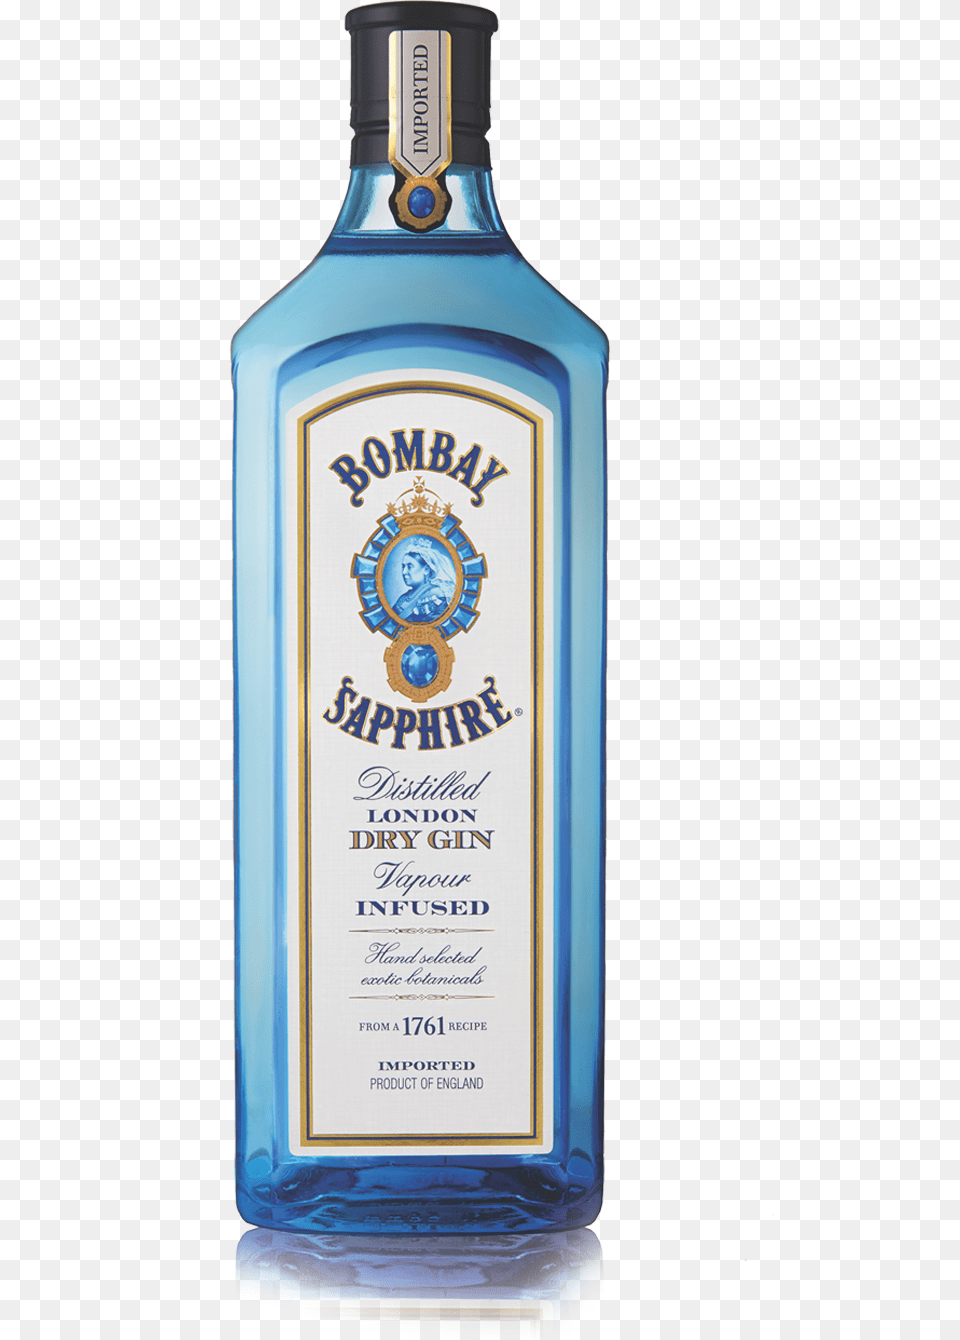 Bombay Sapphire East Bombay Sapphire Price In Delhi, Alcohol, Beverage, Gin, Liquor Png